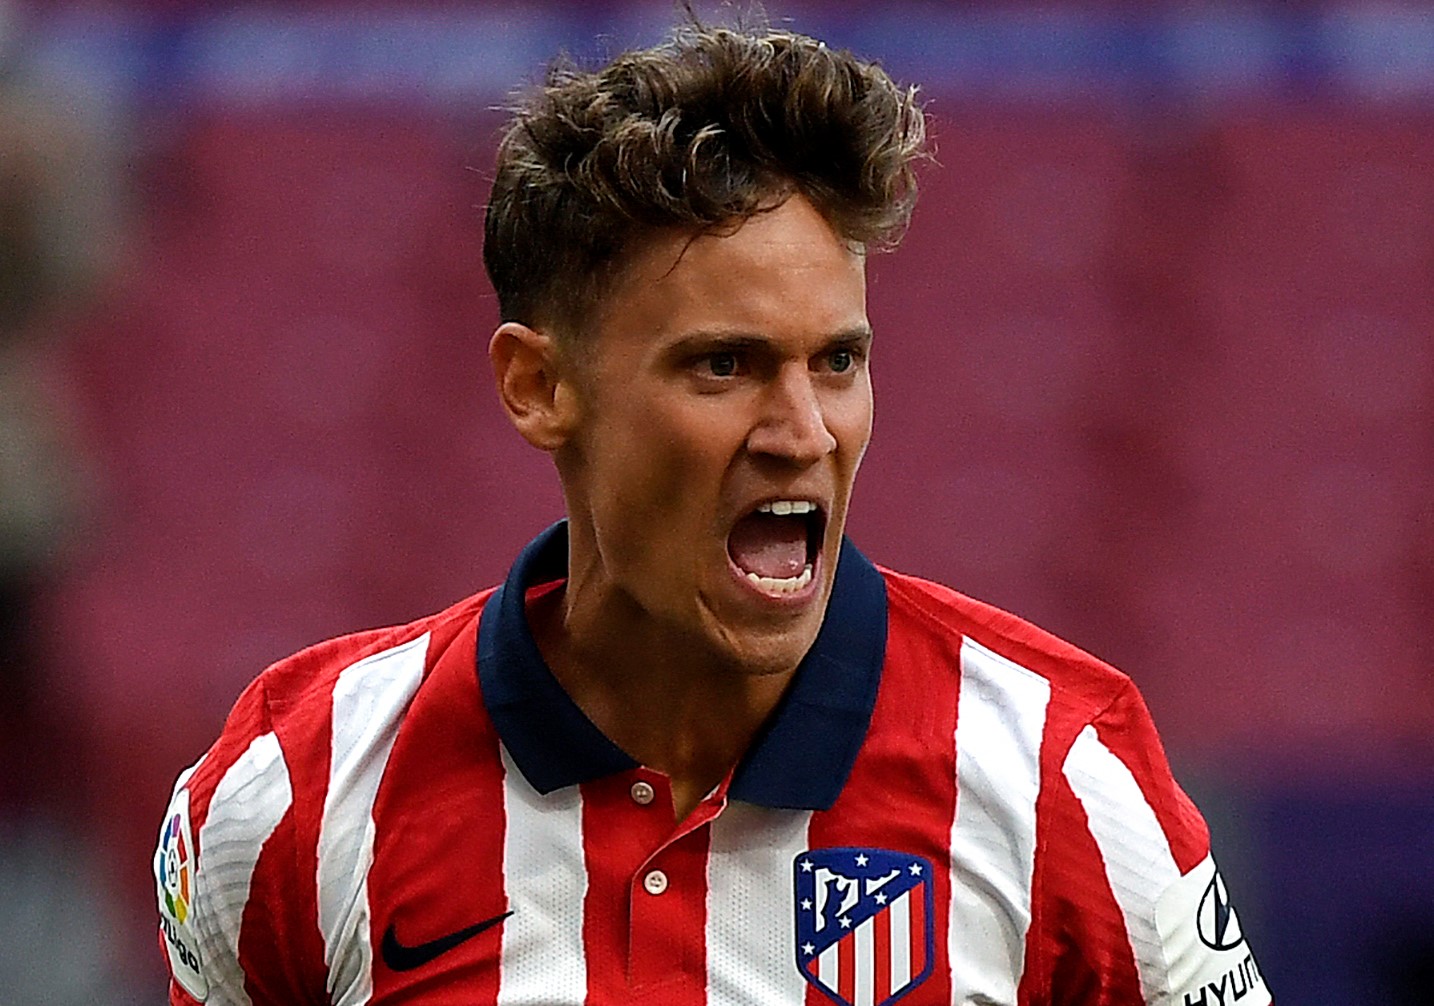 Marcos Llorente has signed a new contract at Atletico Madrid until 2027 | Transfer News